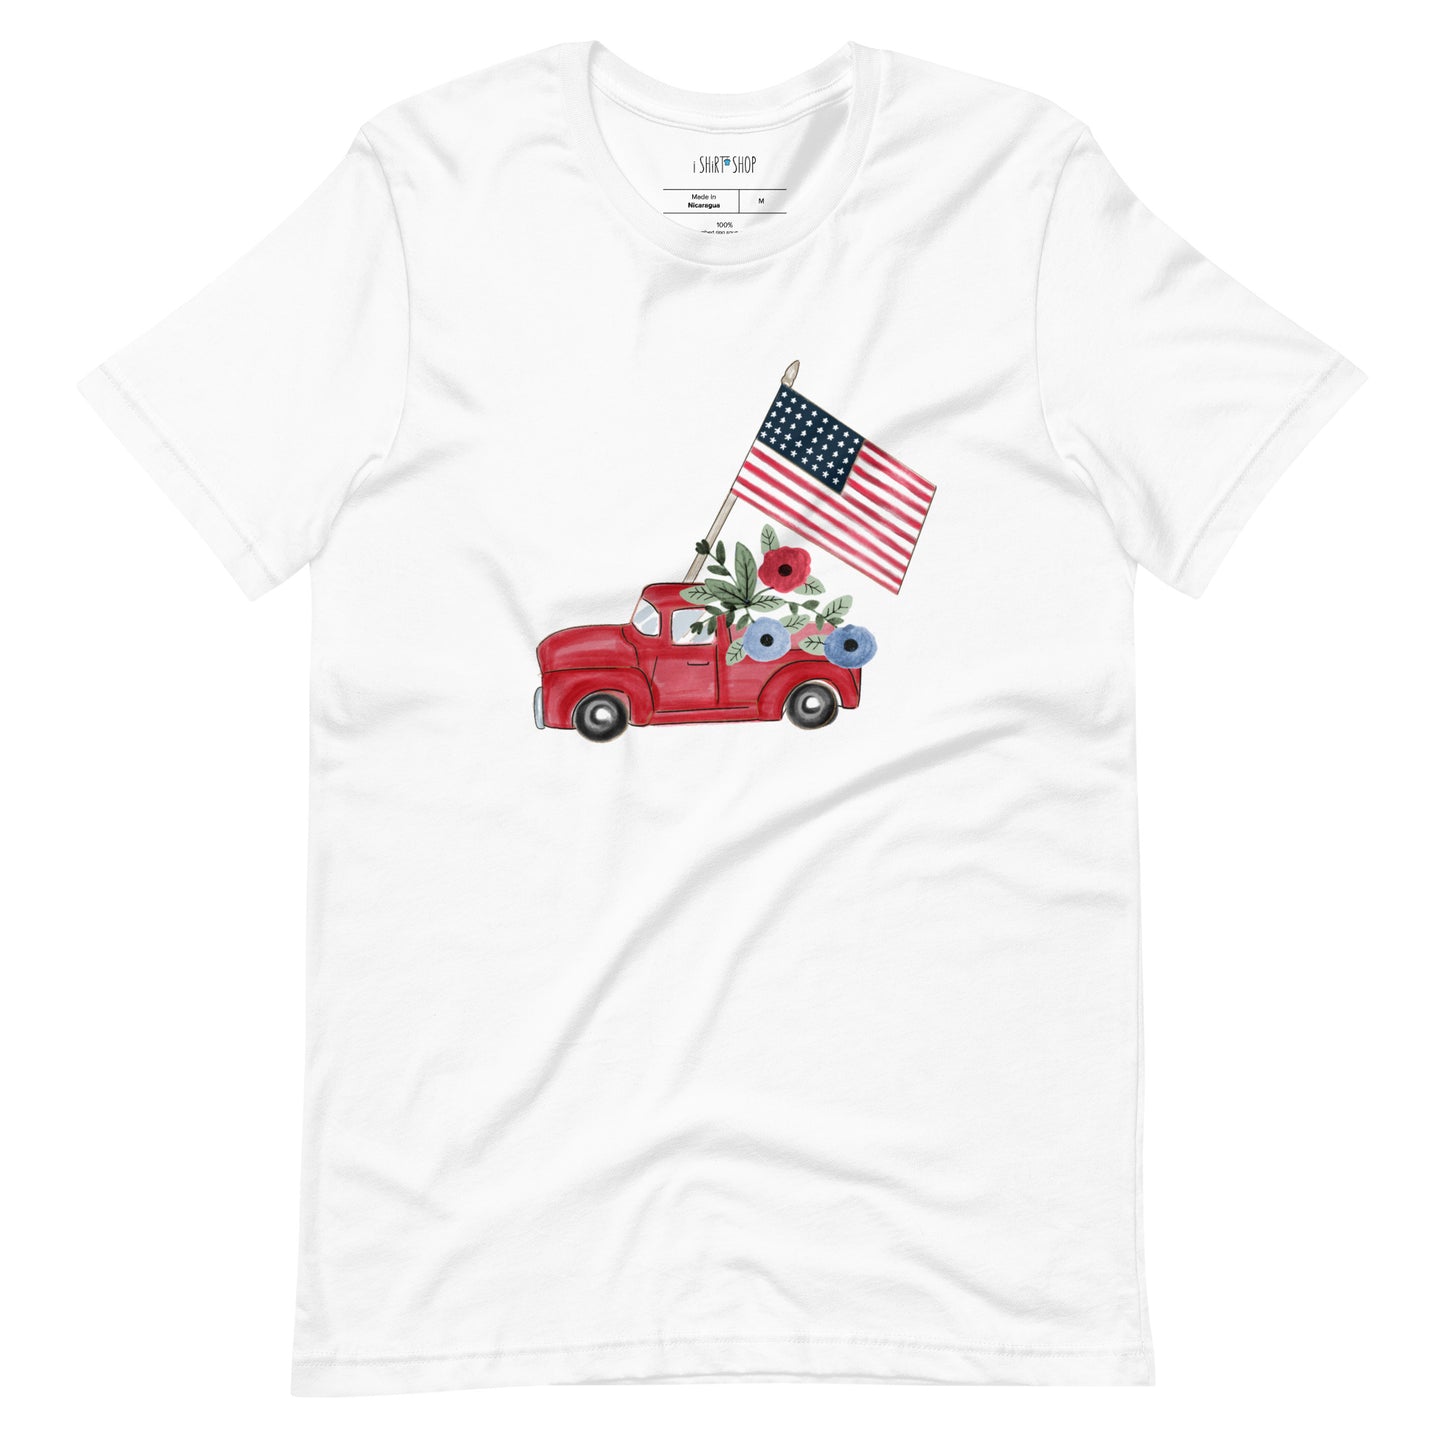 America Is Home Unisex T-Shirt